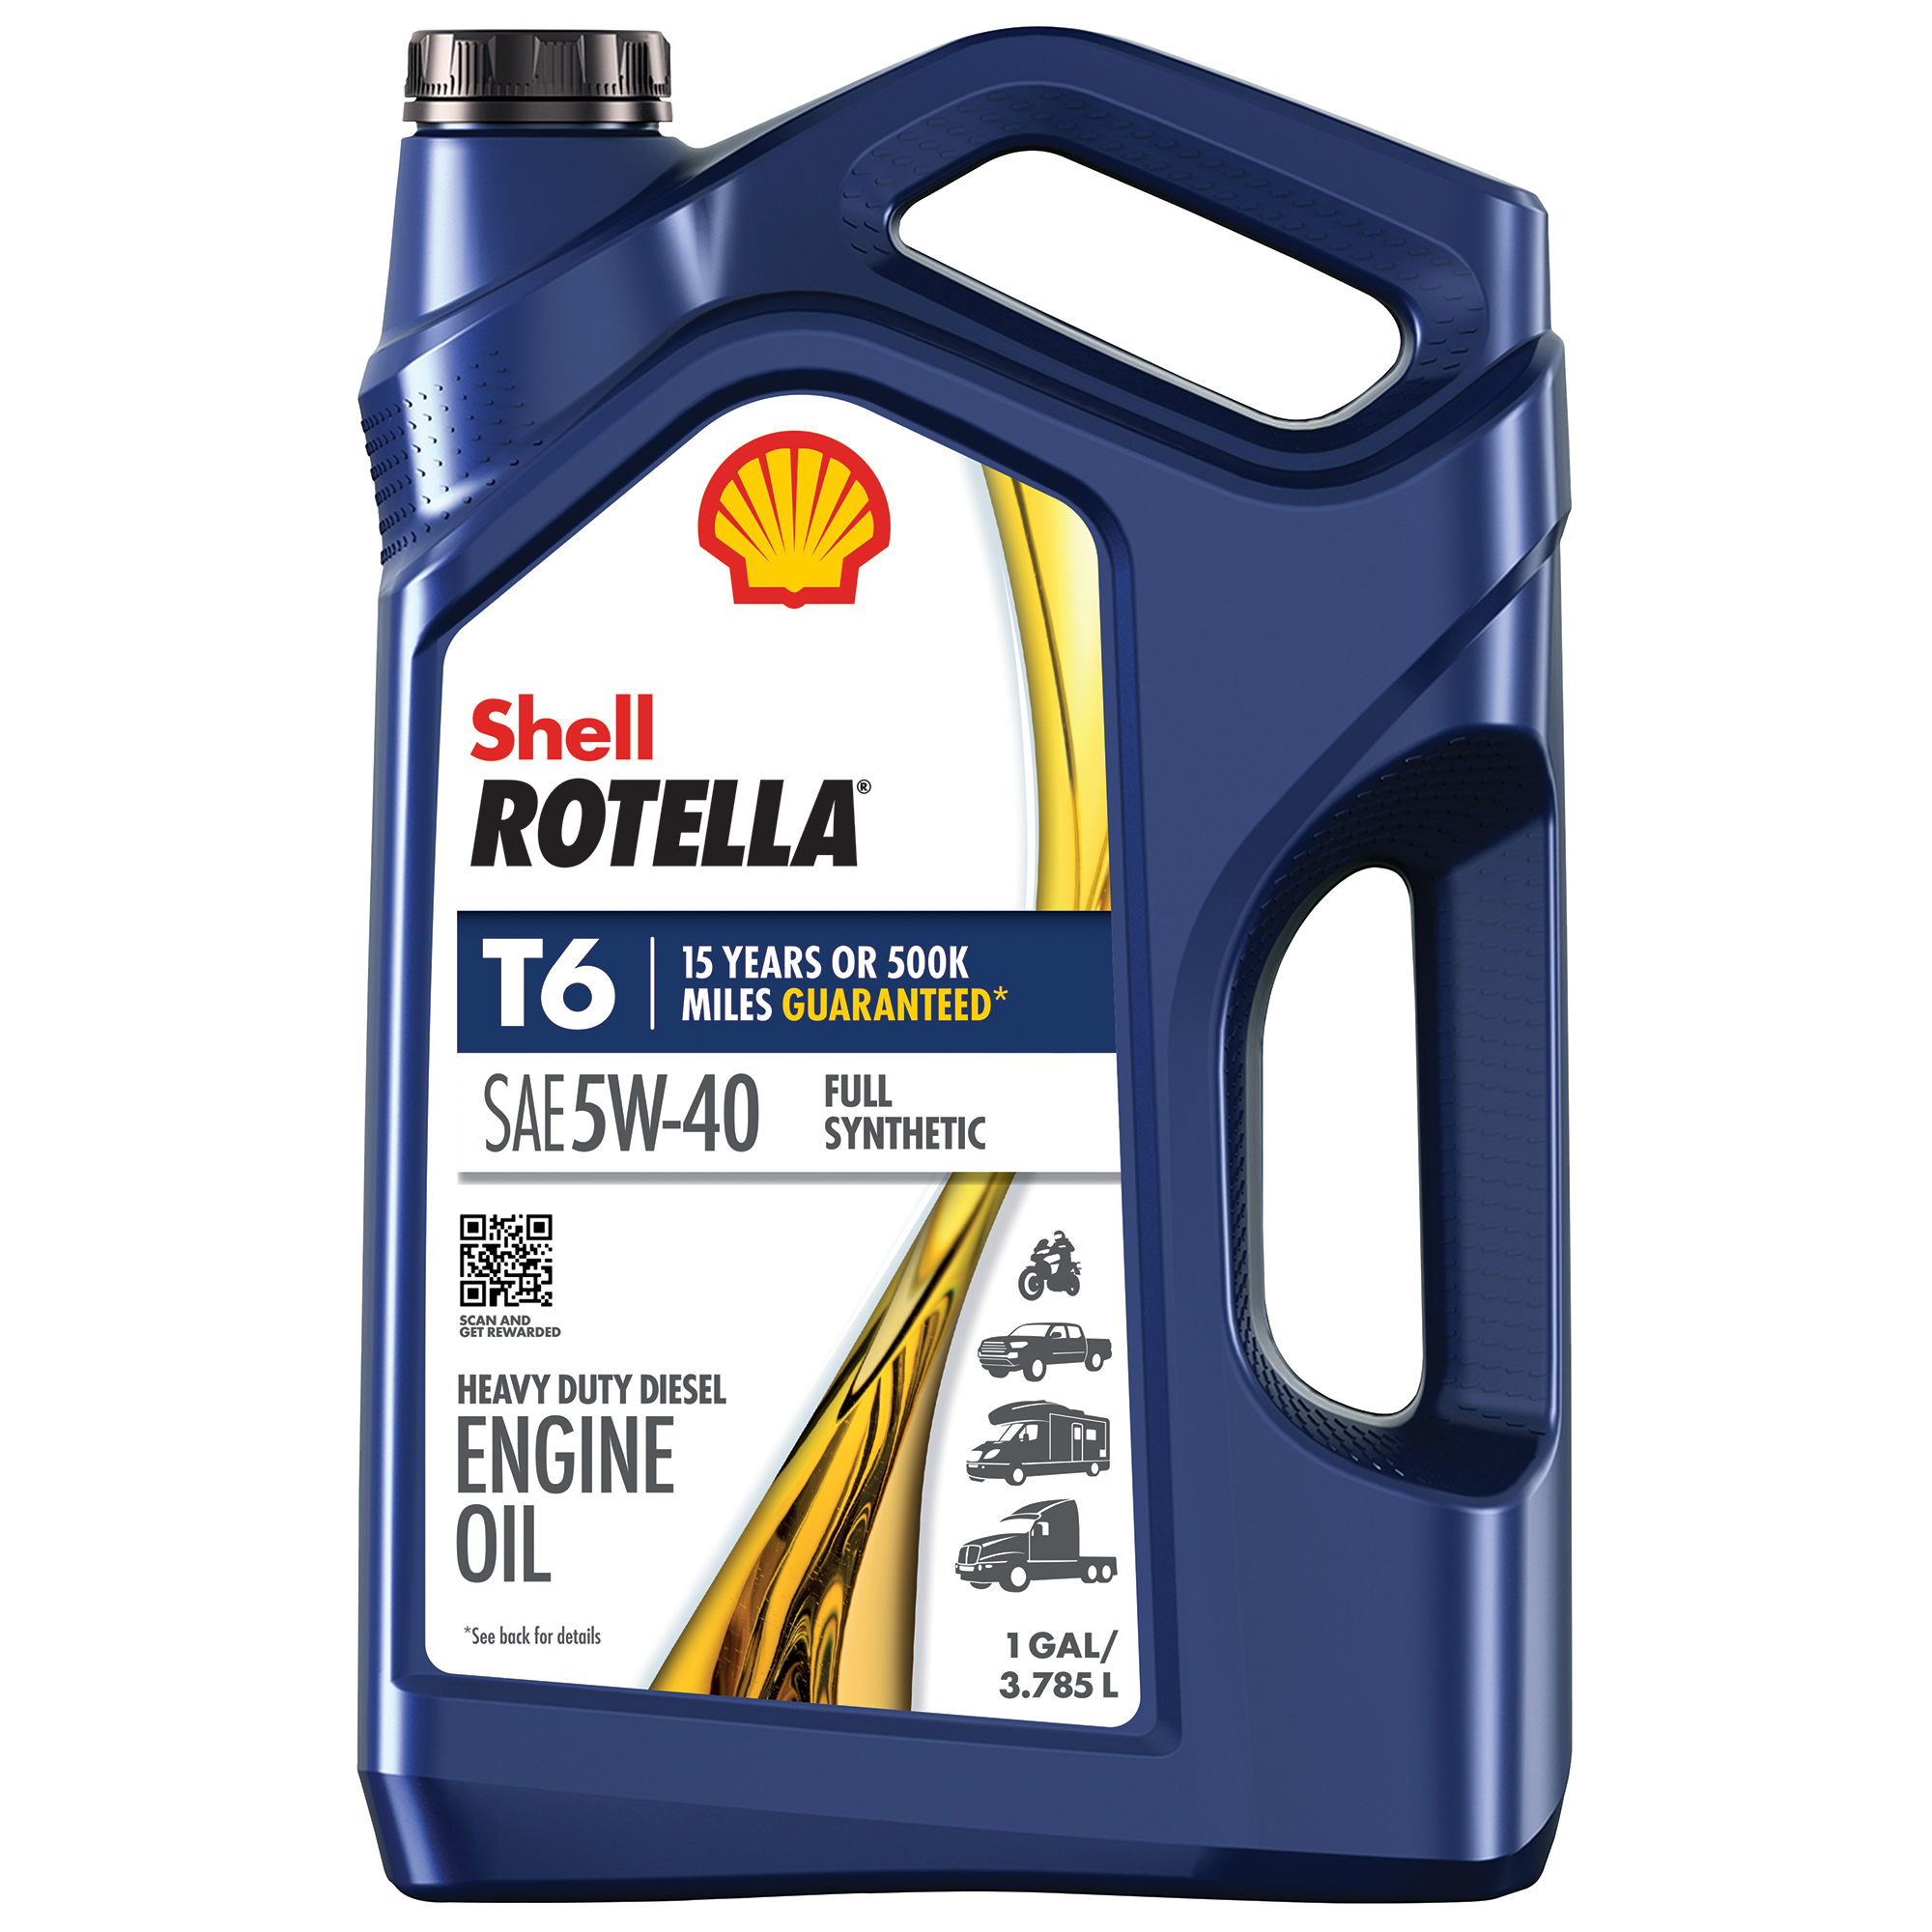 Shell Rotella T6 Full Synthetic 5W-40 Diesel Engine Oil, 1 Gallon - image 1 of 9